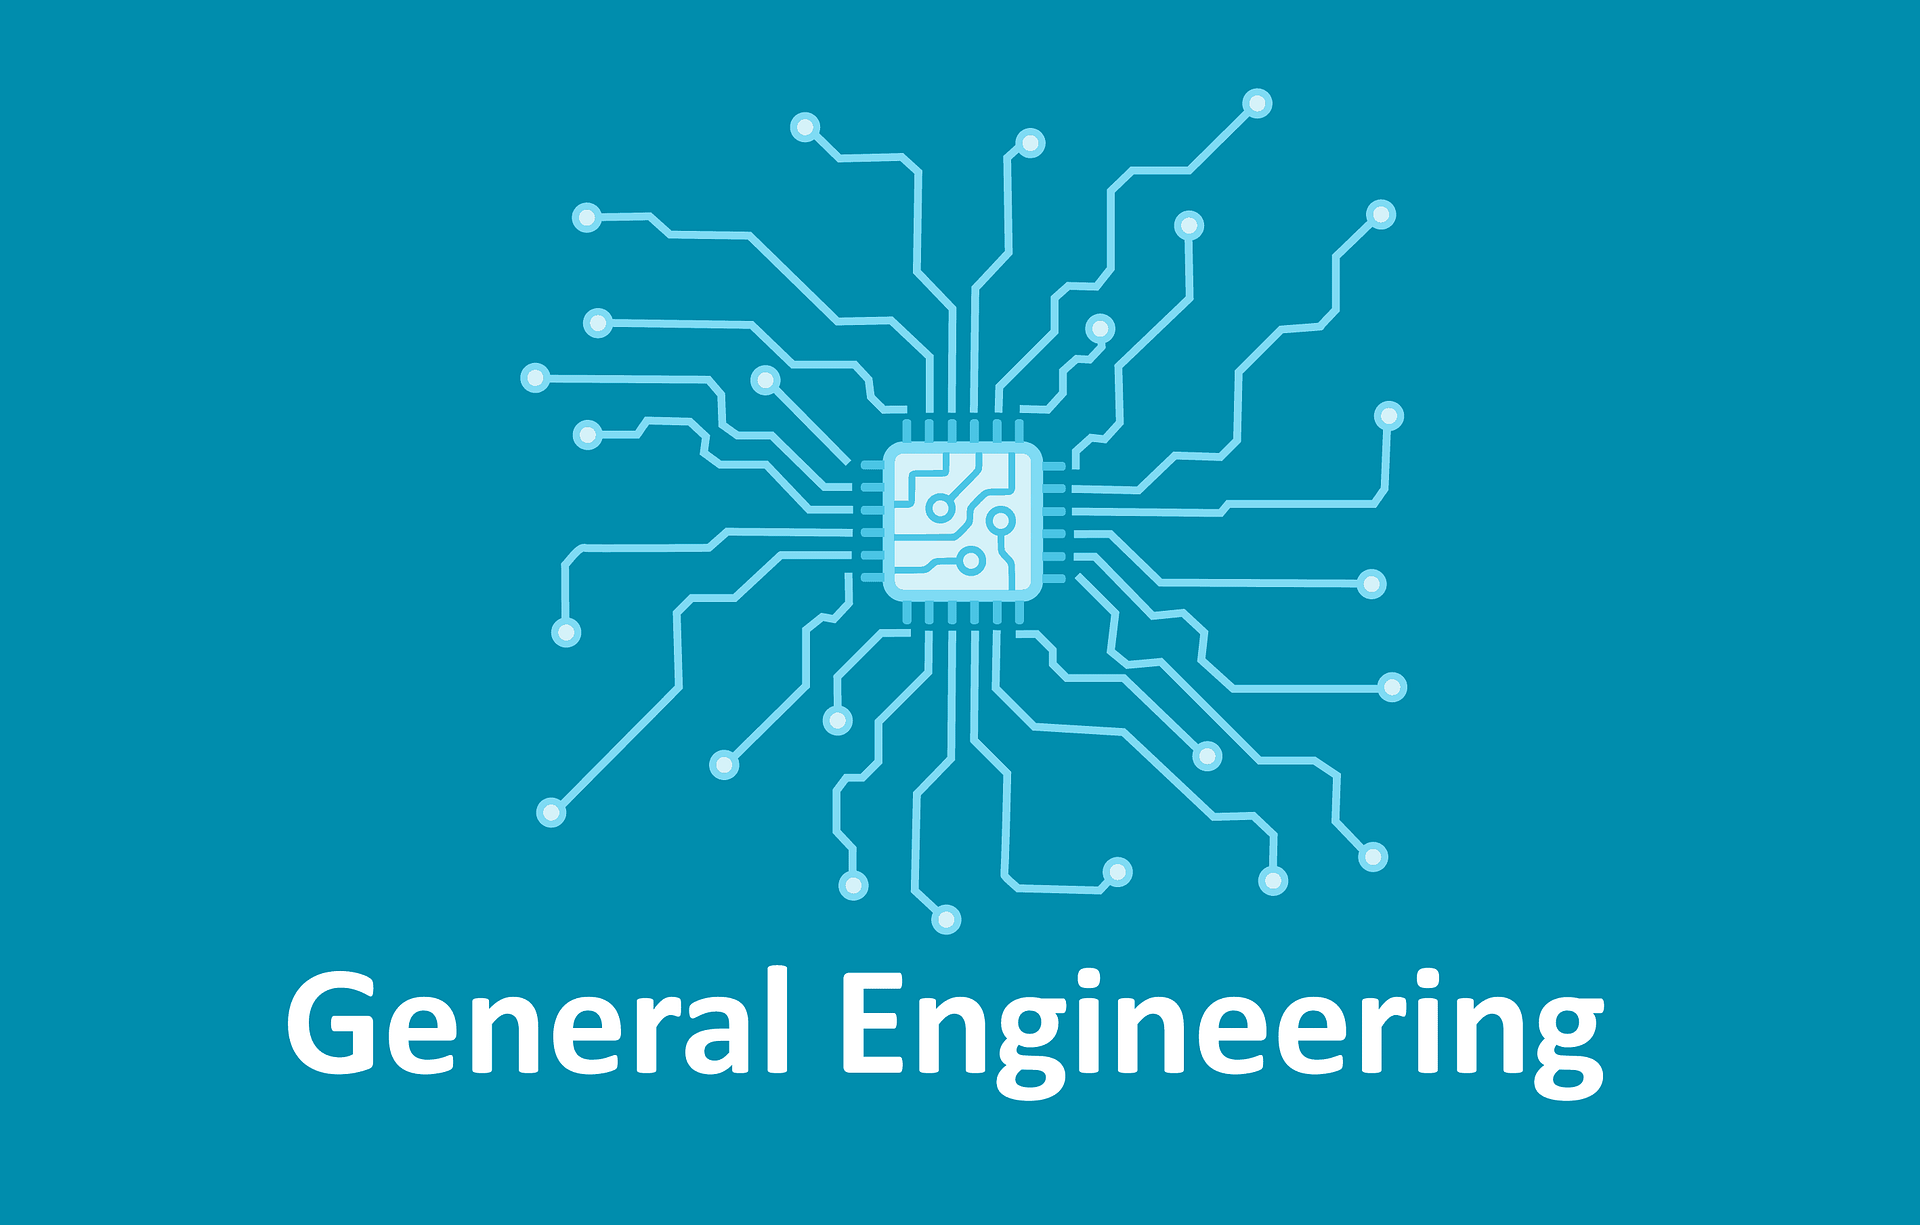 Organisational Design for General Engineering including electrical, electronic, mechanical and systems engineering.